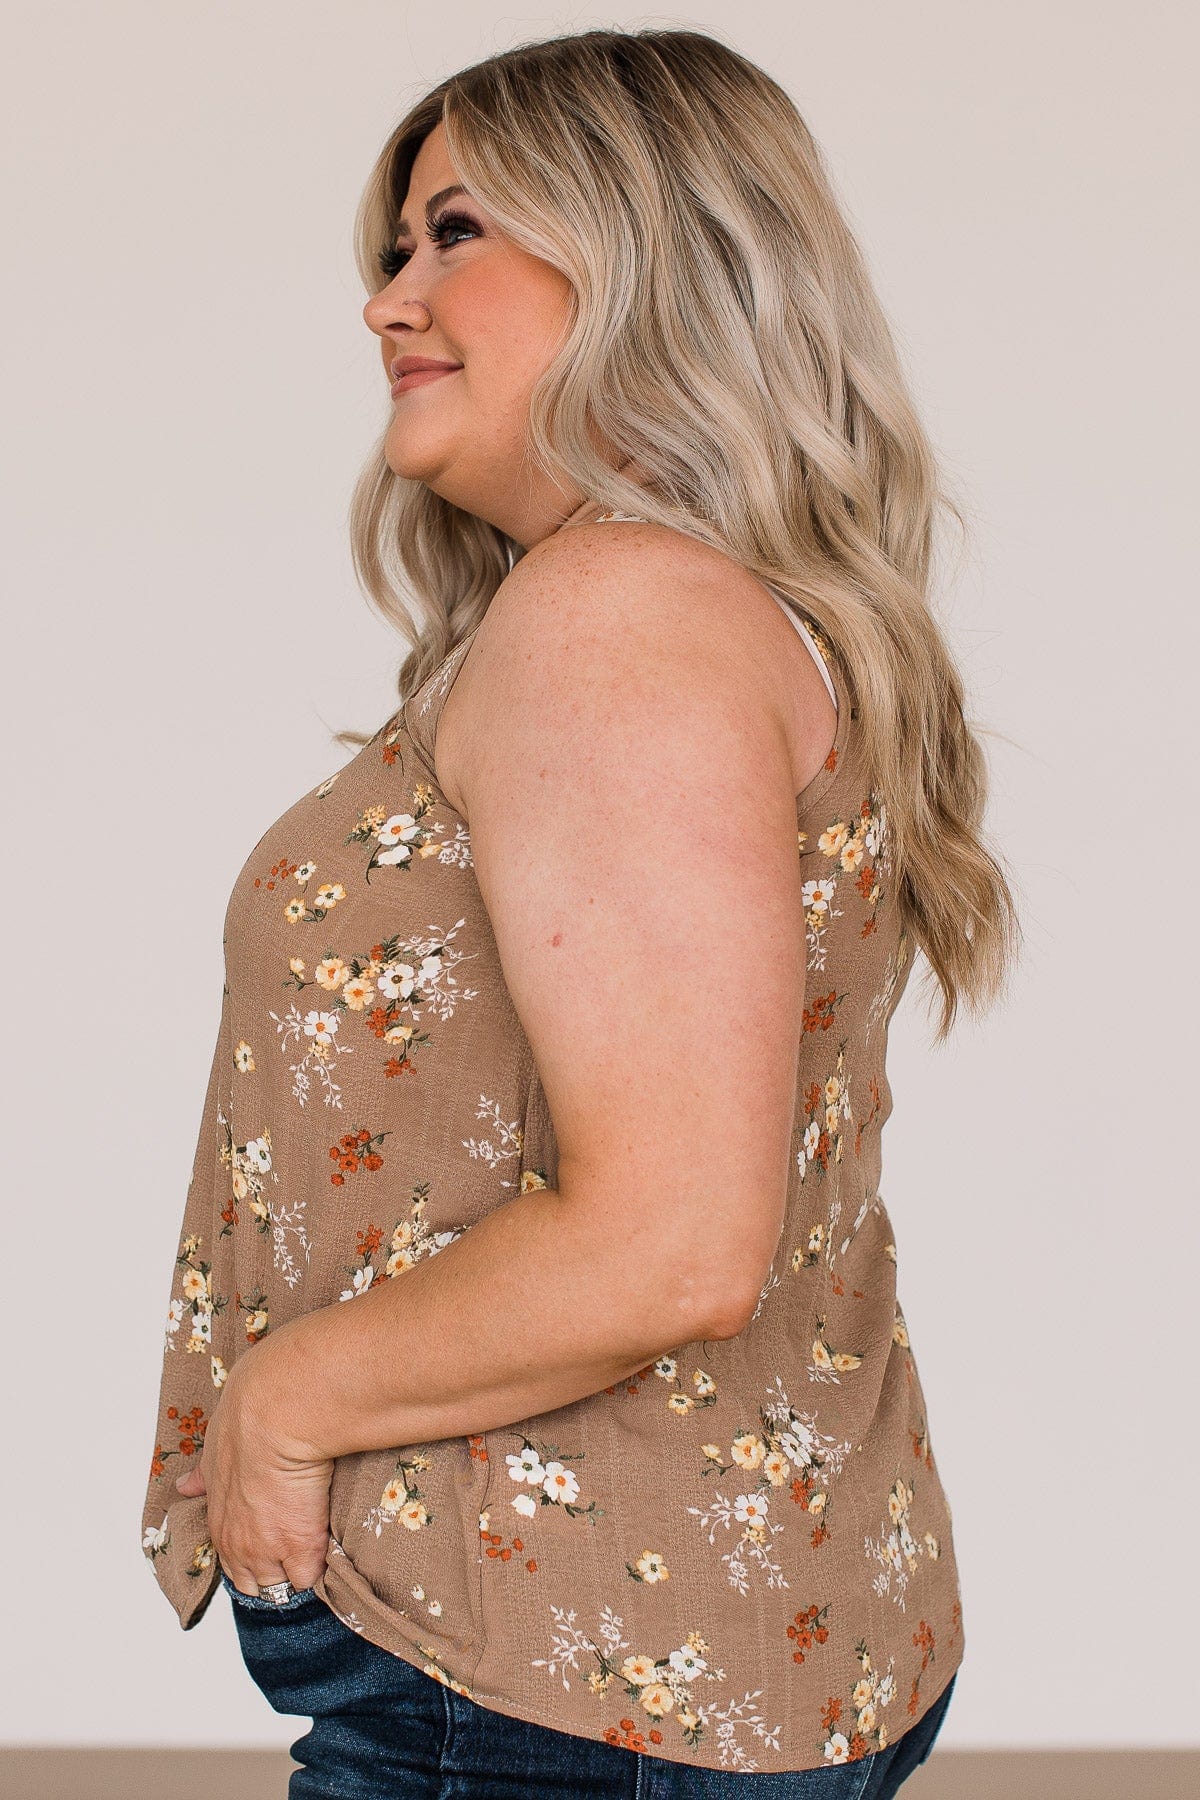 Explore Your Heart Floral Tank Top- Taupe